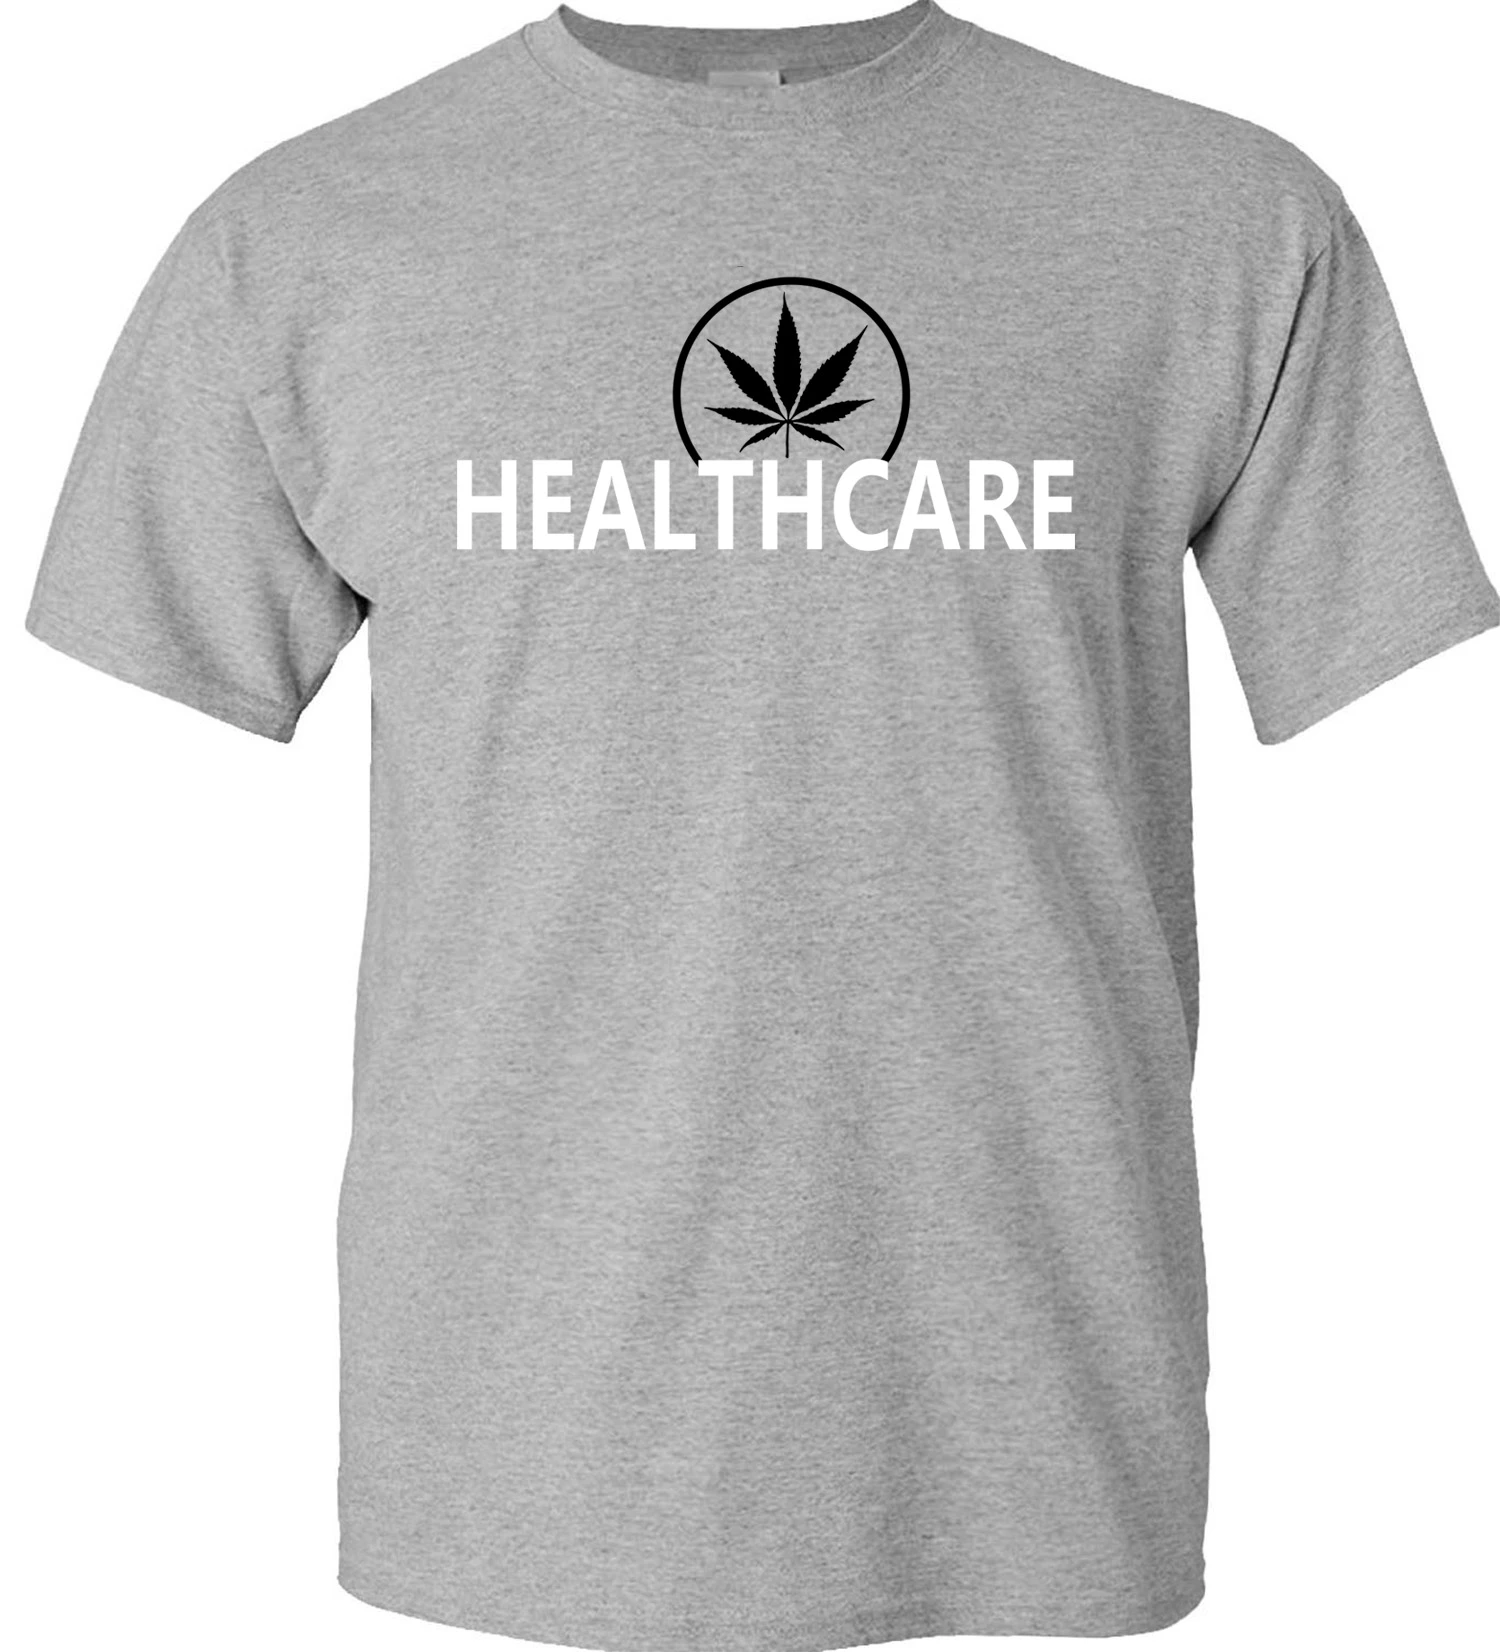 Afstoten Afm antwoord THC Is Medicine Weed Cannabis Healthcare T shirt Funny Shirt|funny shirt|t- shirt funnyshirt funny - AliExpress